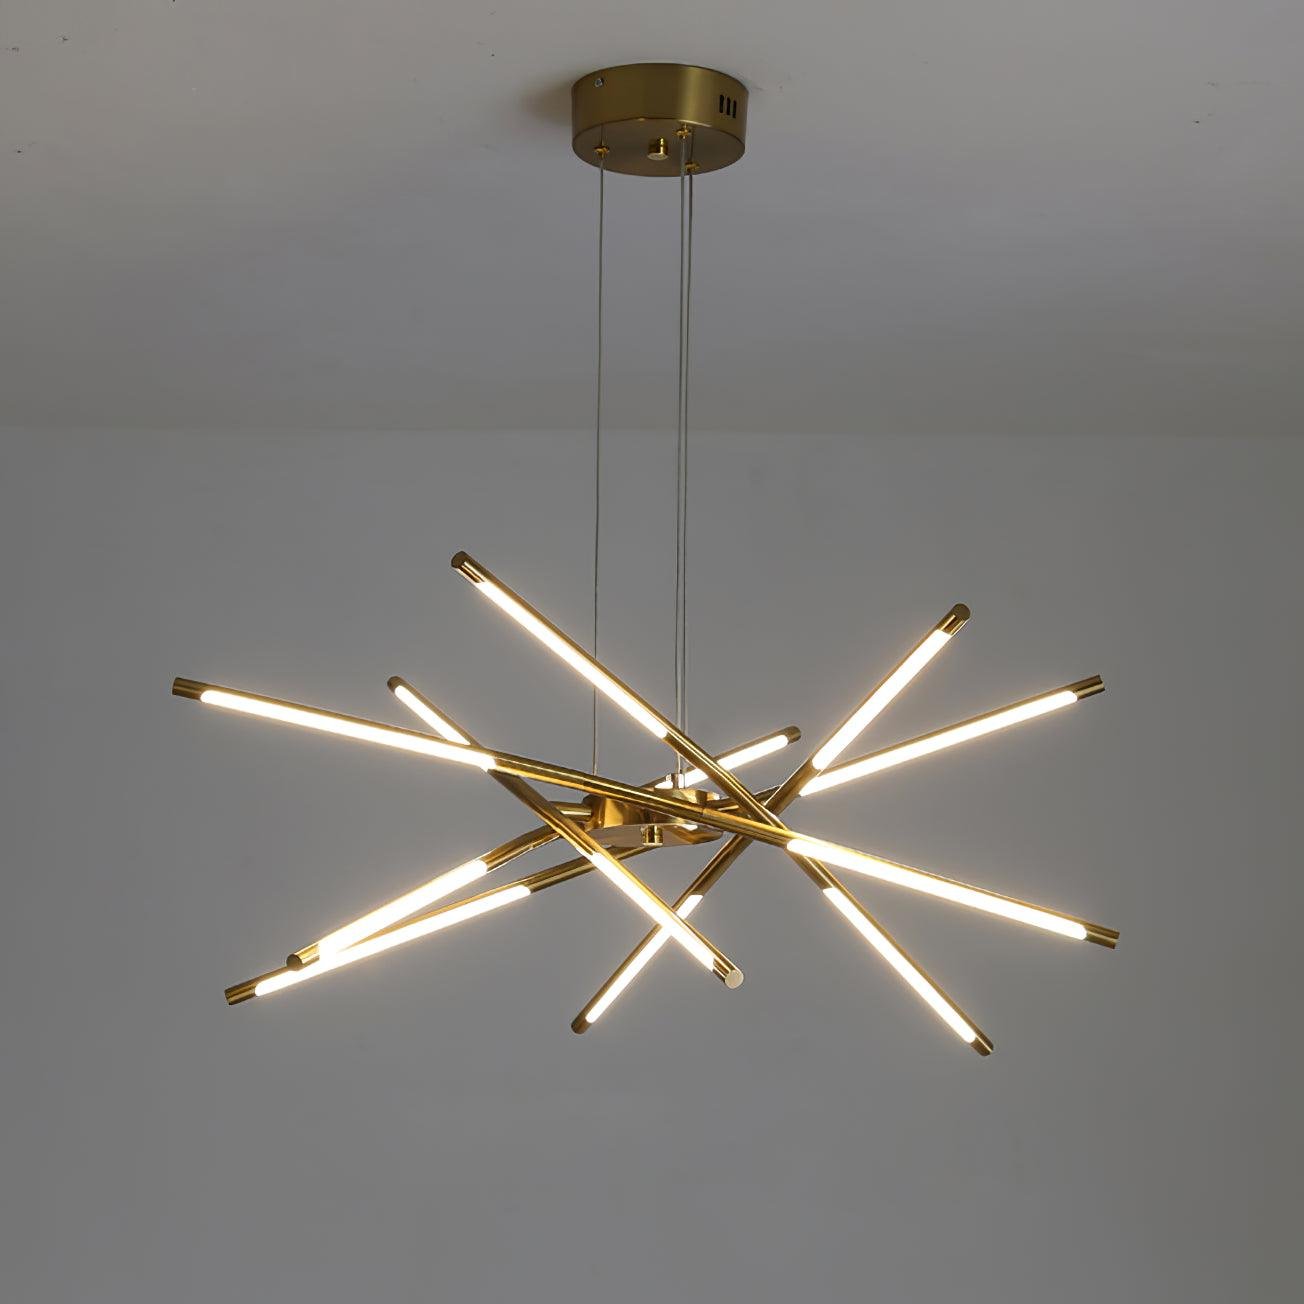 12-Head Rotatable LED Chandelier in Gold Finish, Dimensions: W 31.5″ x H 27.6″ (W 80cm x H 70cm), Emitting Cool Light